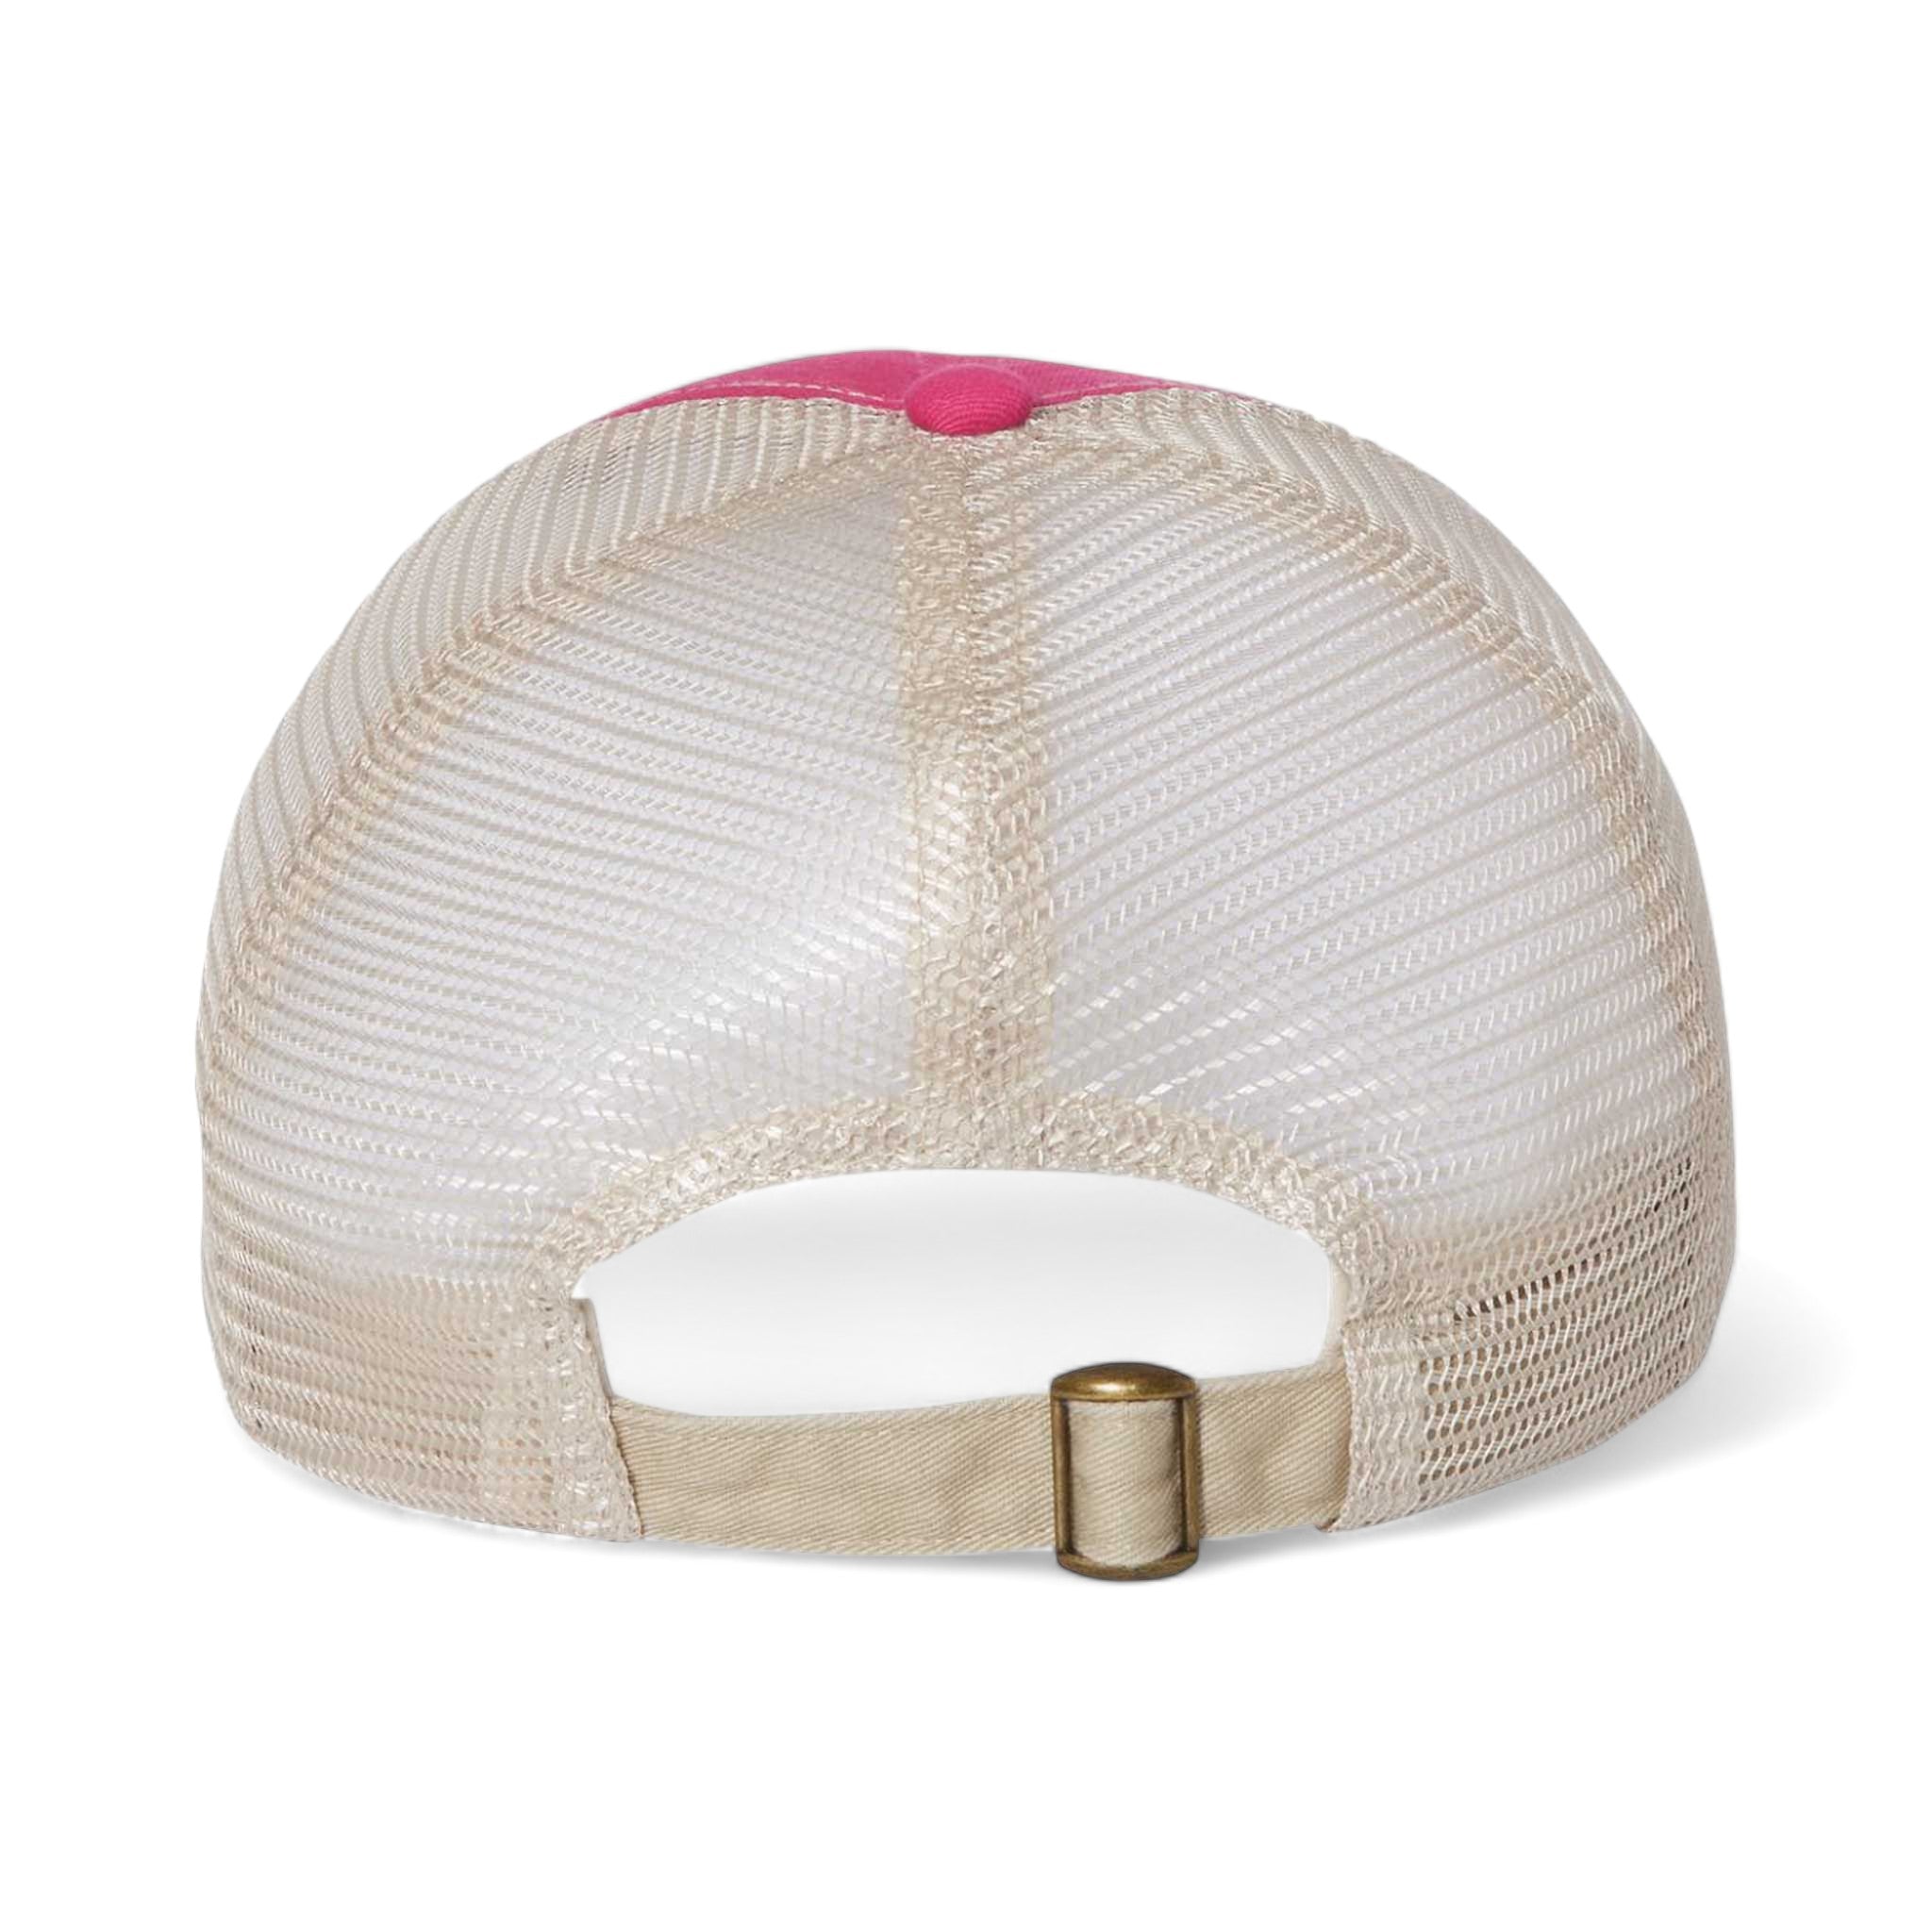 Back view of Sportsman 3100 custom hat in pink and stone